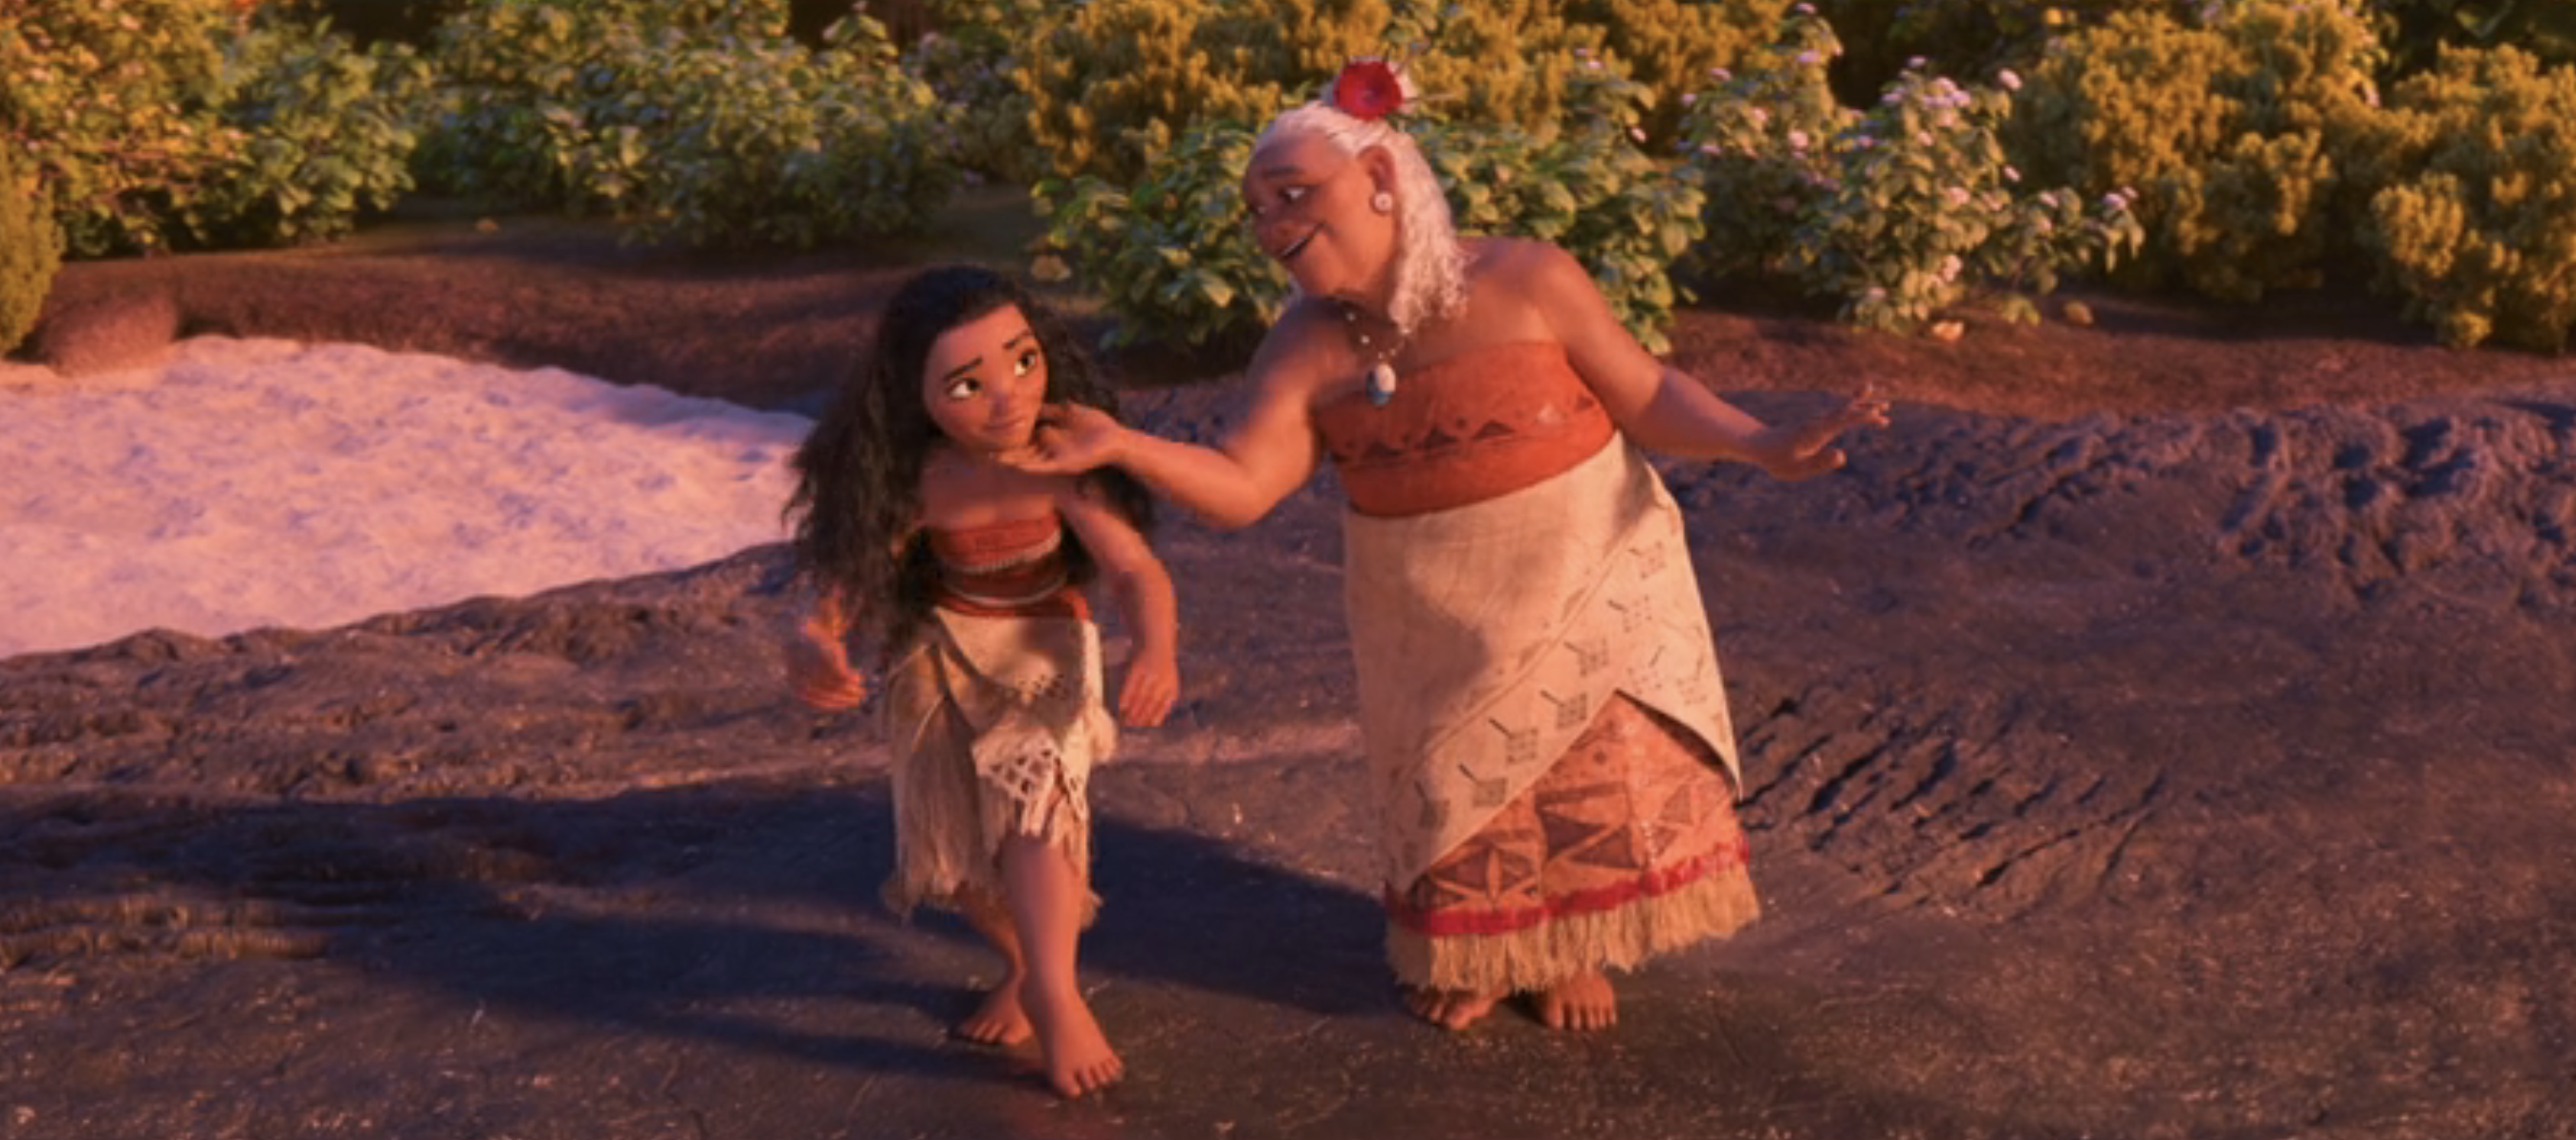 Moana and Gramma Tala animated characters standing together with a gentle touch, traditional Polynesian attire, beach background